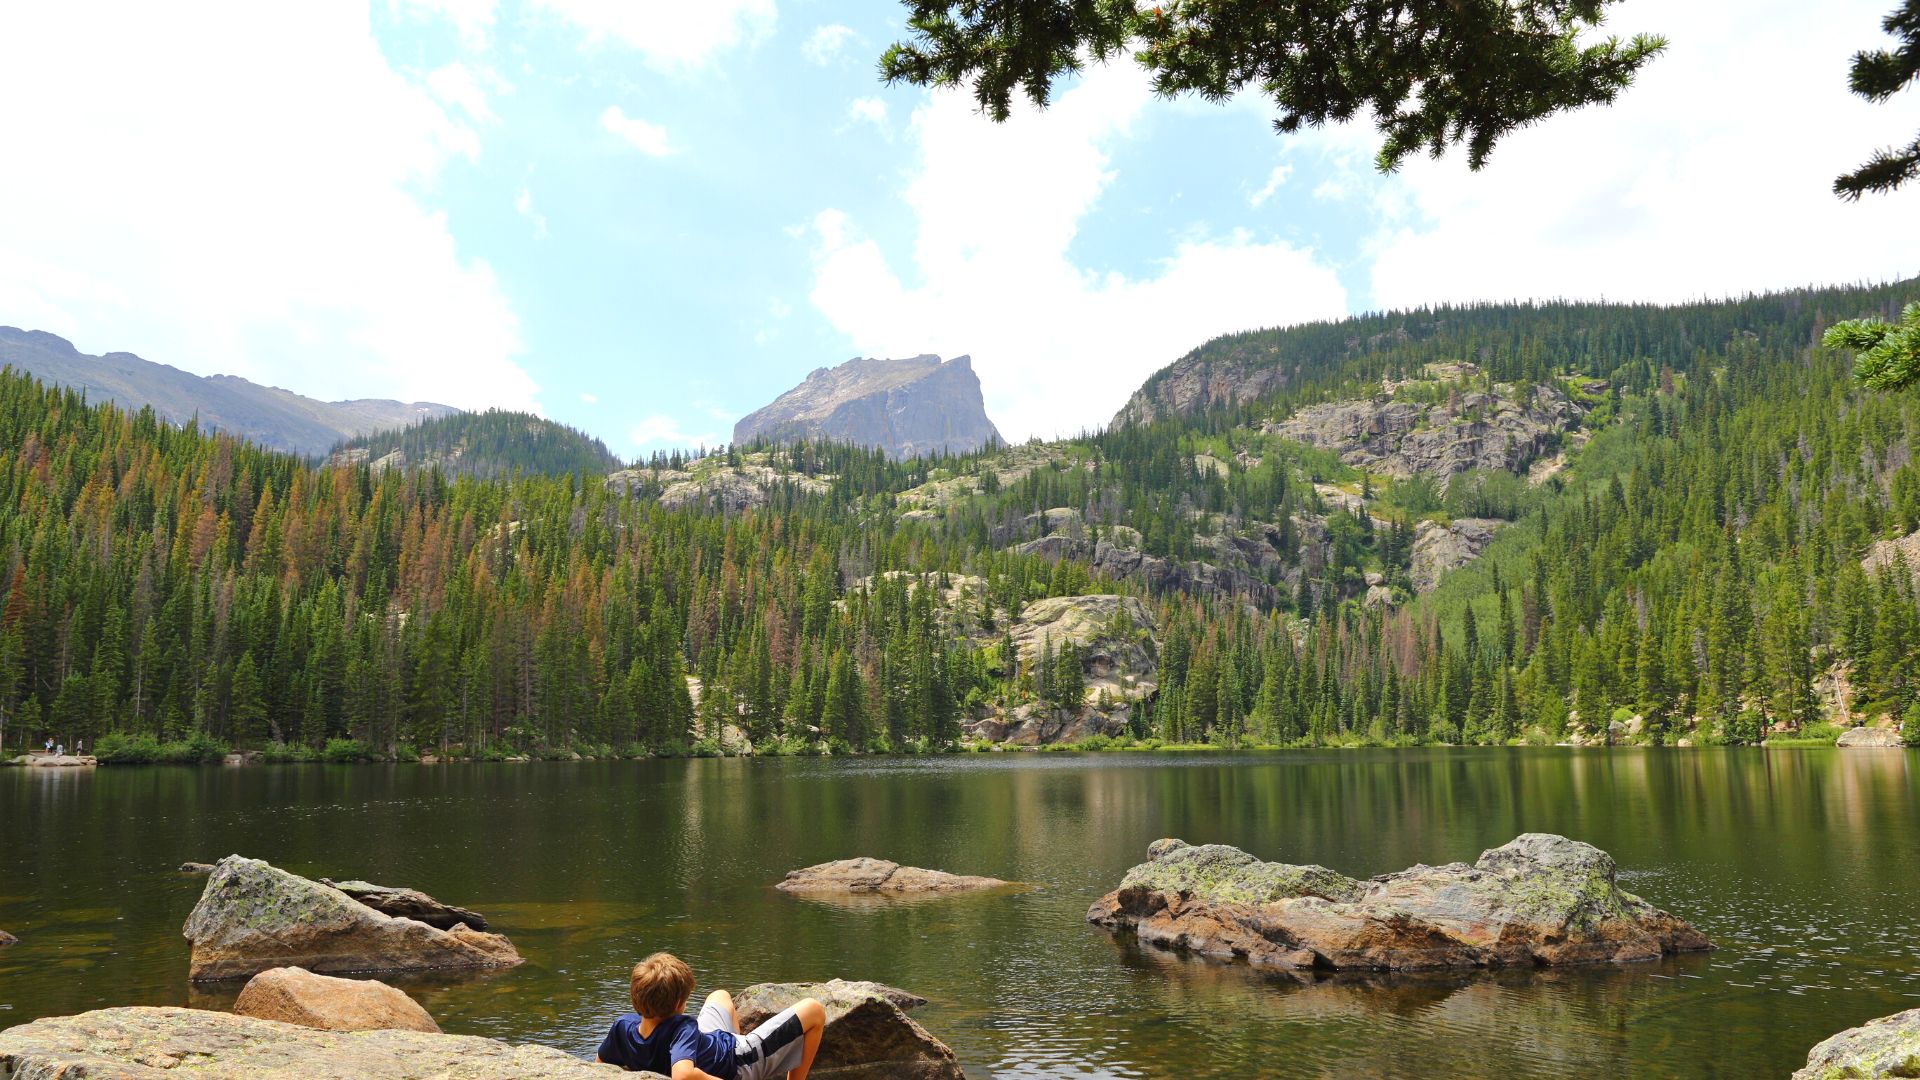 Someone reclines on a rock at the edge of a clear, still lake in the mountains